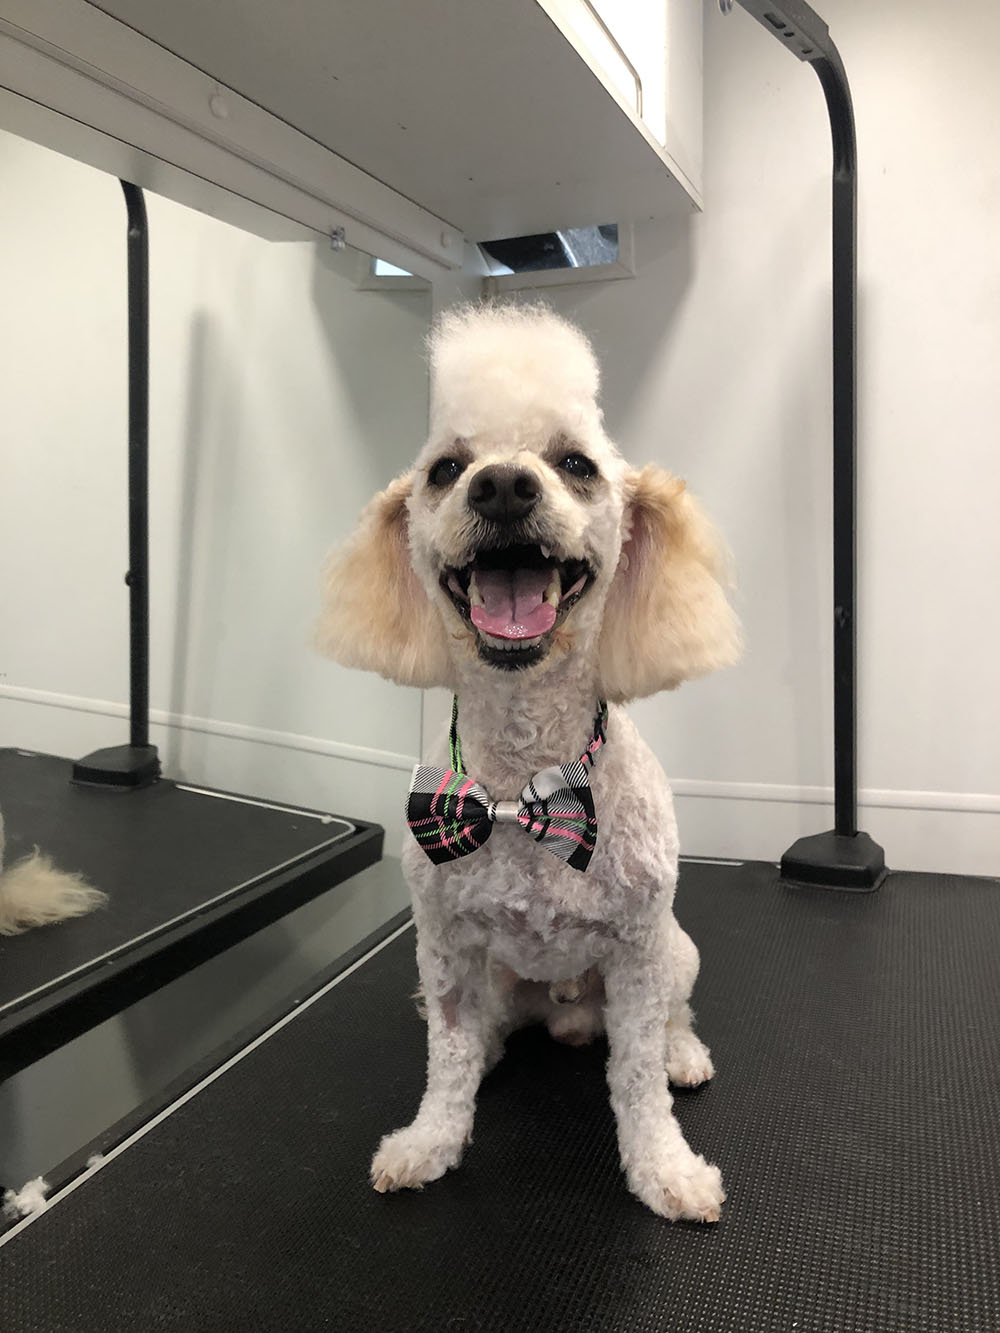 A White Color Fur Dog With White Fur on the Crown